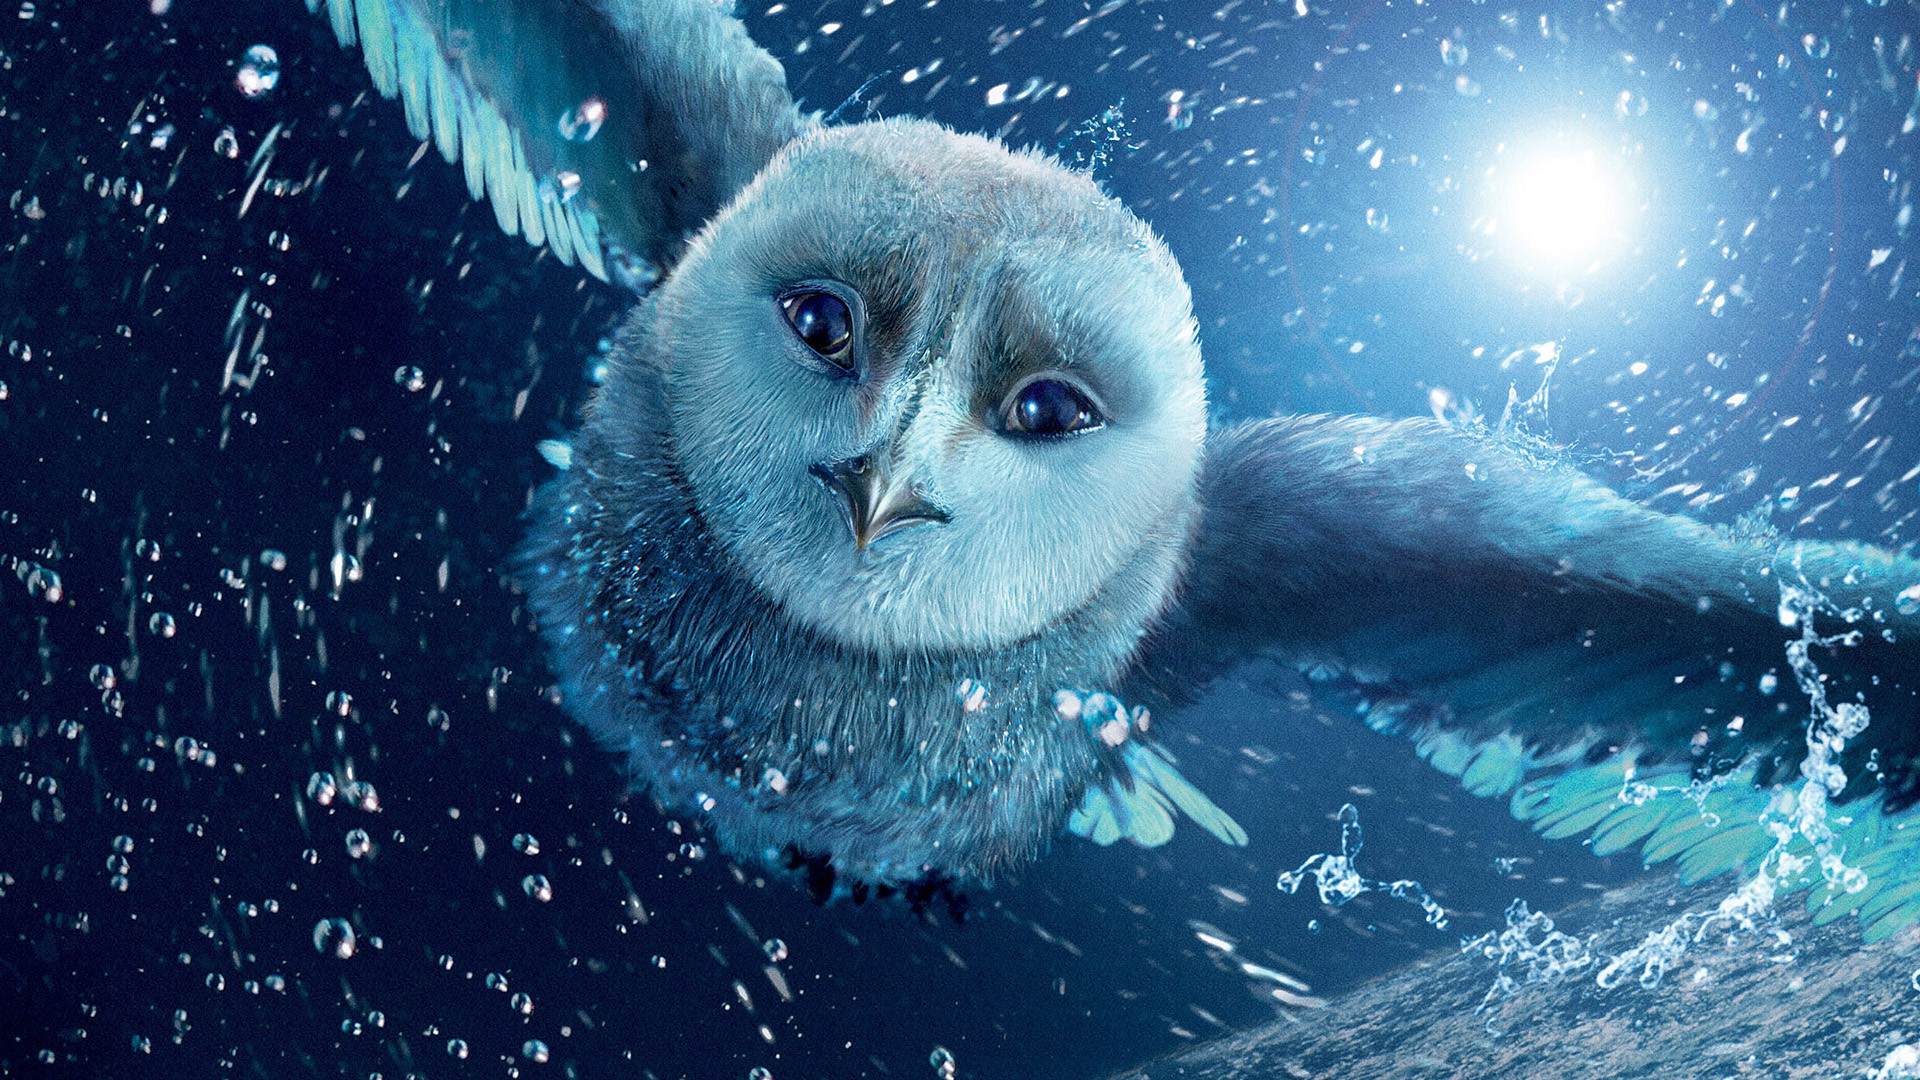 movie, legend of the guardians: the owls of ga'hoole